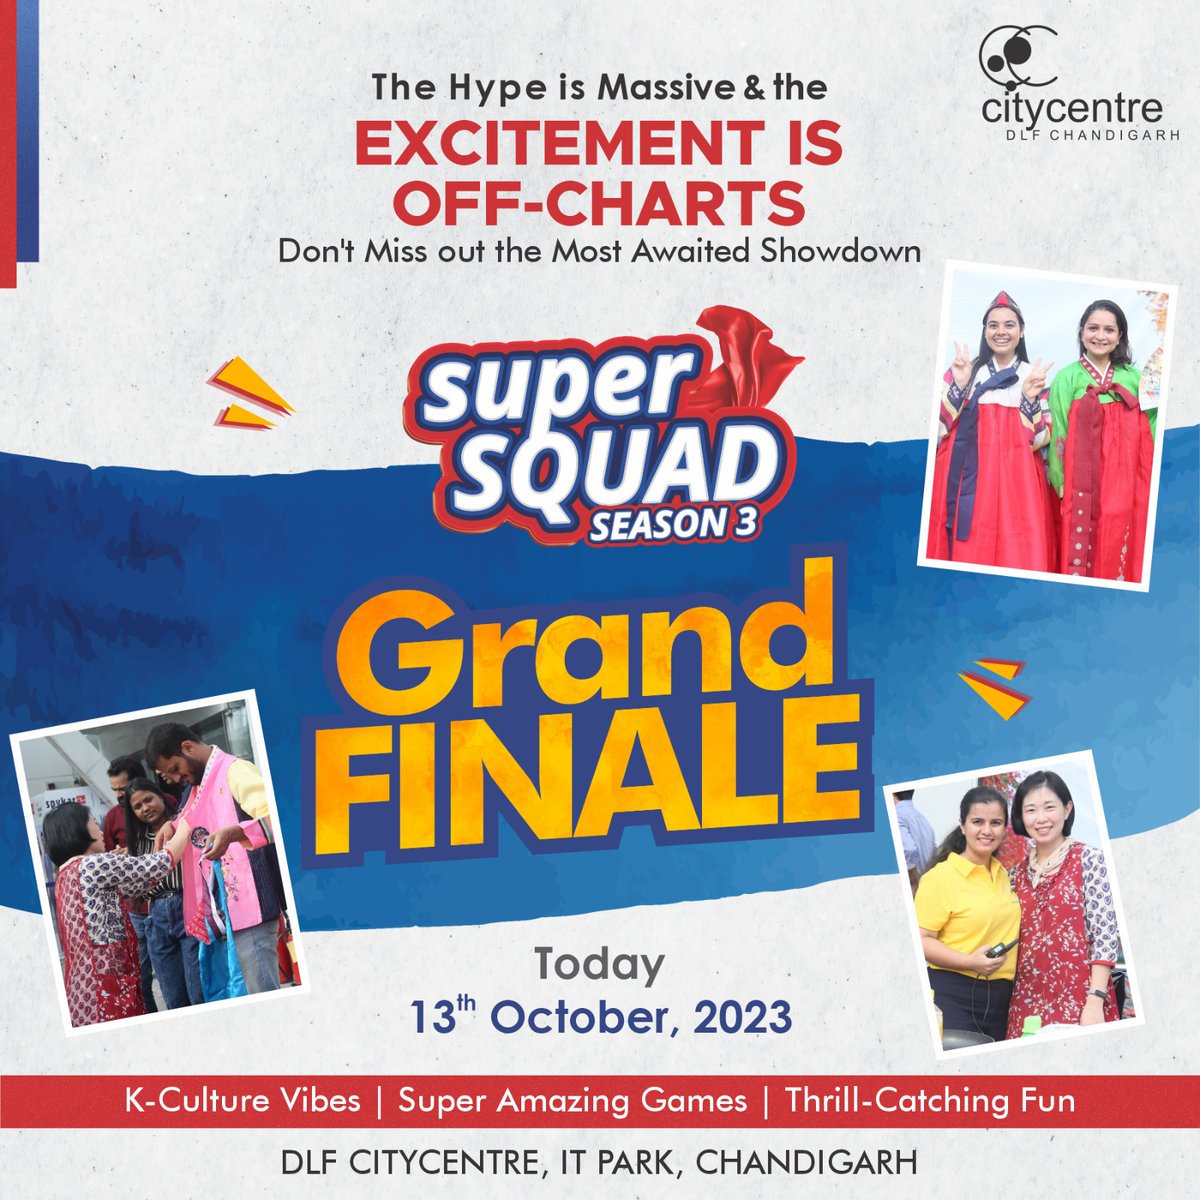 And the #Winner is....... We welcome you to witness the Fun, #KoreanCulture, Games, Excitement & Victory of INR 1 Lakh #FreeShopping with the #GRANDFINALE of #SUPERSQUADSEASON3 on 13th October at #DLFCityCentreMallITParkChandigarh.